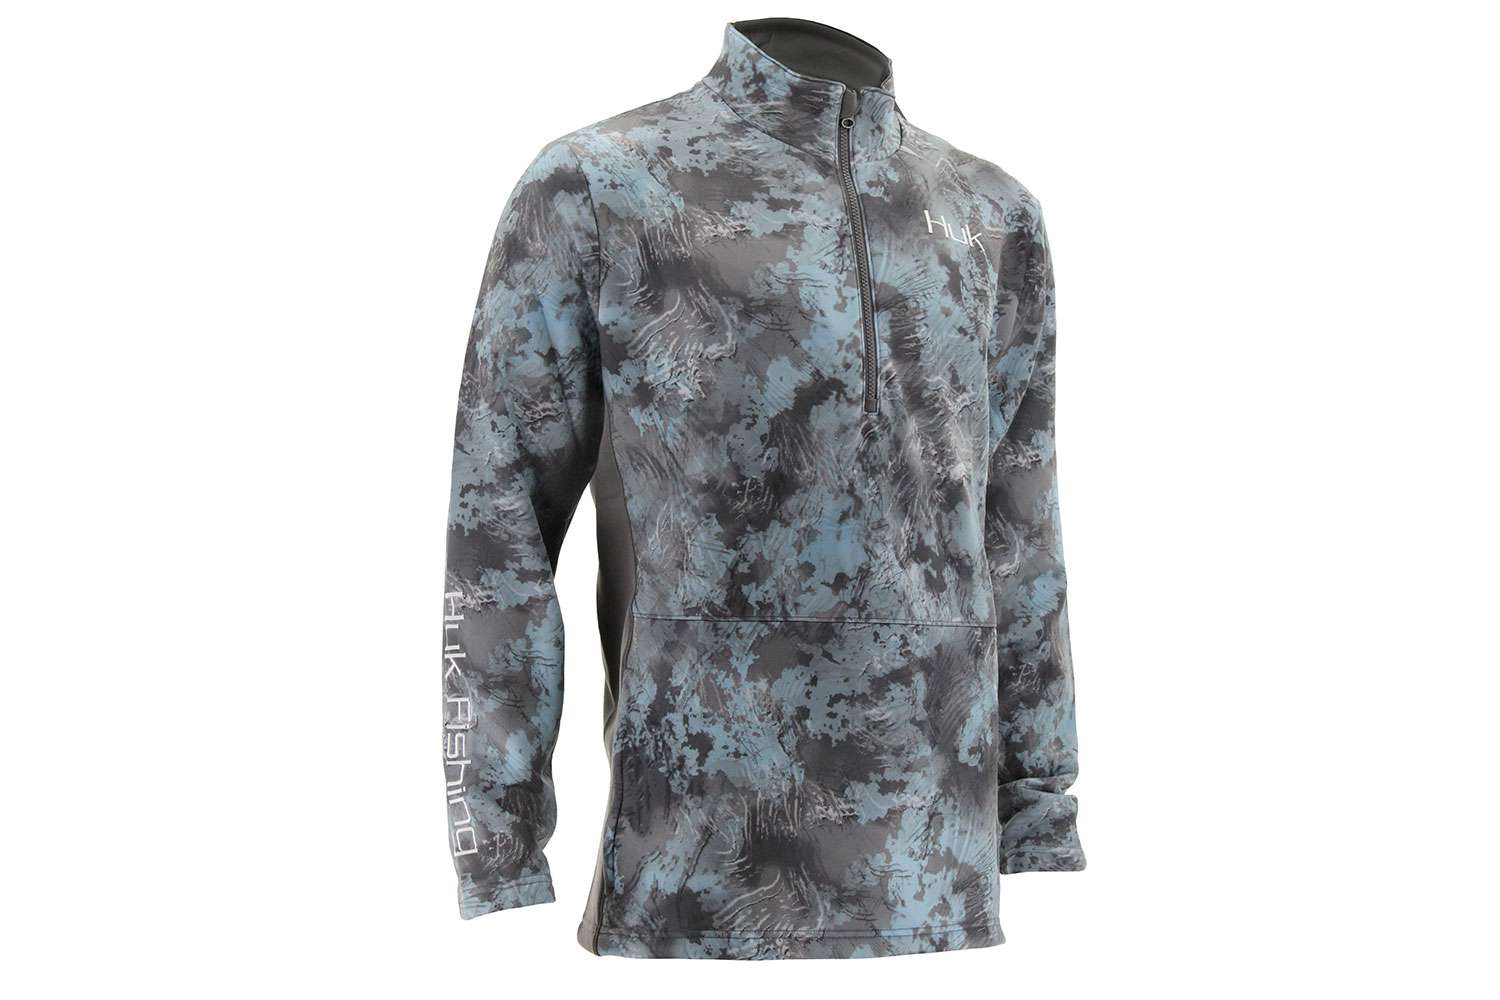 <p><b>Huk Tidewater Subphantis Camo 1/4 Zip, $64.99</b></p> Water Resistant - Repels Boat Spray and Light Rain. Lightweight Fleece - Perfect for Early Morning. Stain Resistant. Wind Resistant. Sizing: S - 3XL and four colors. <br> <a href=